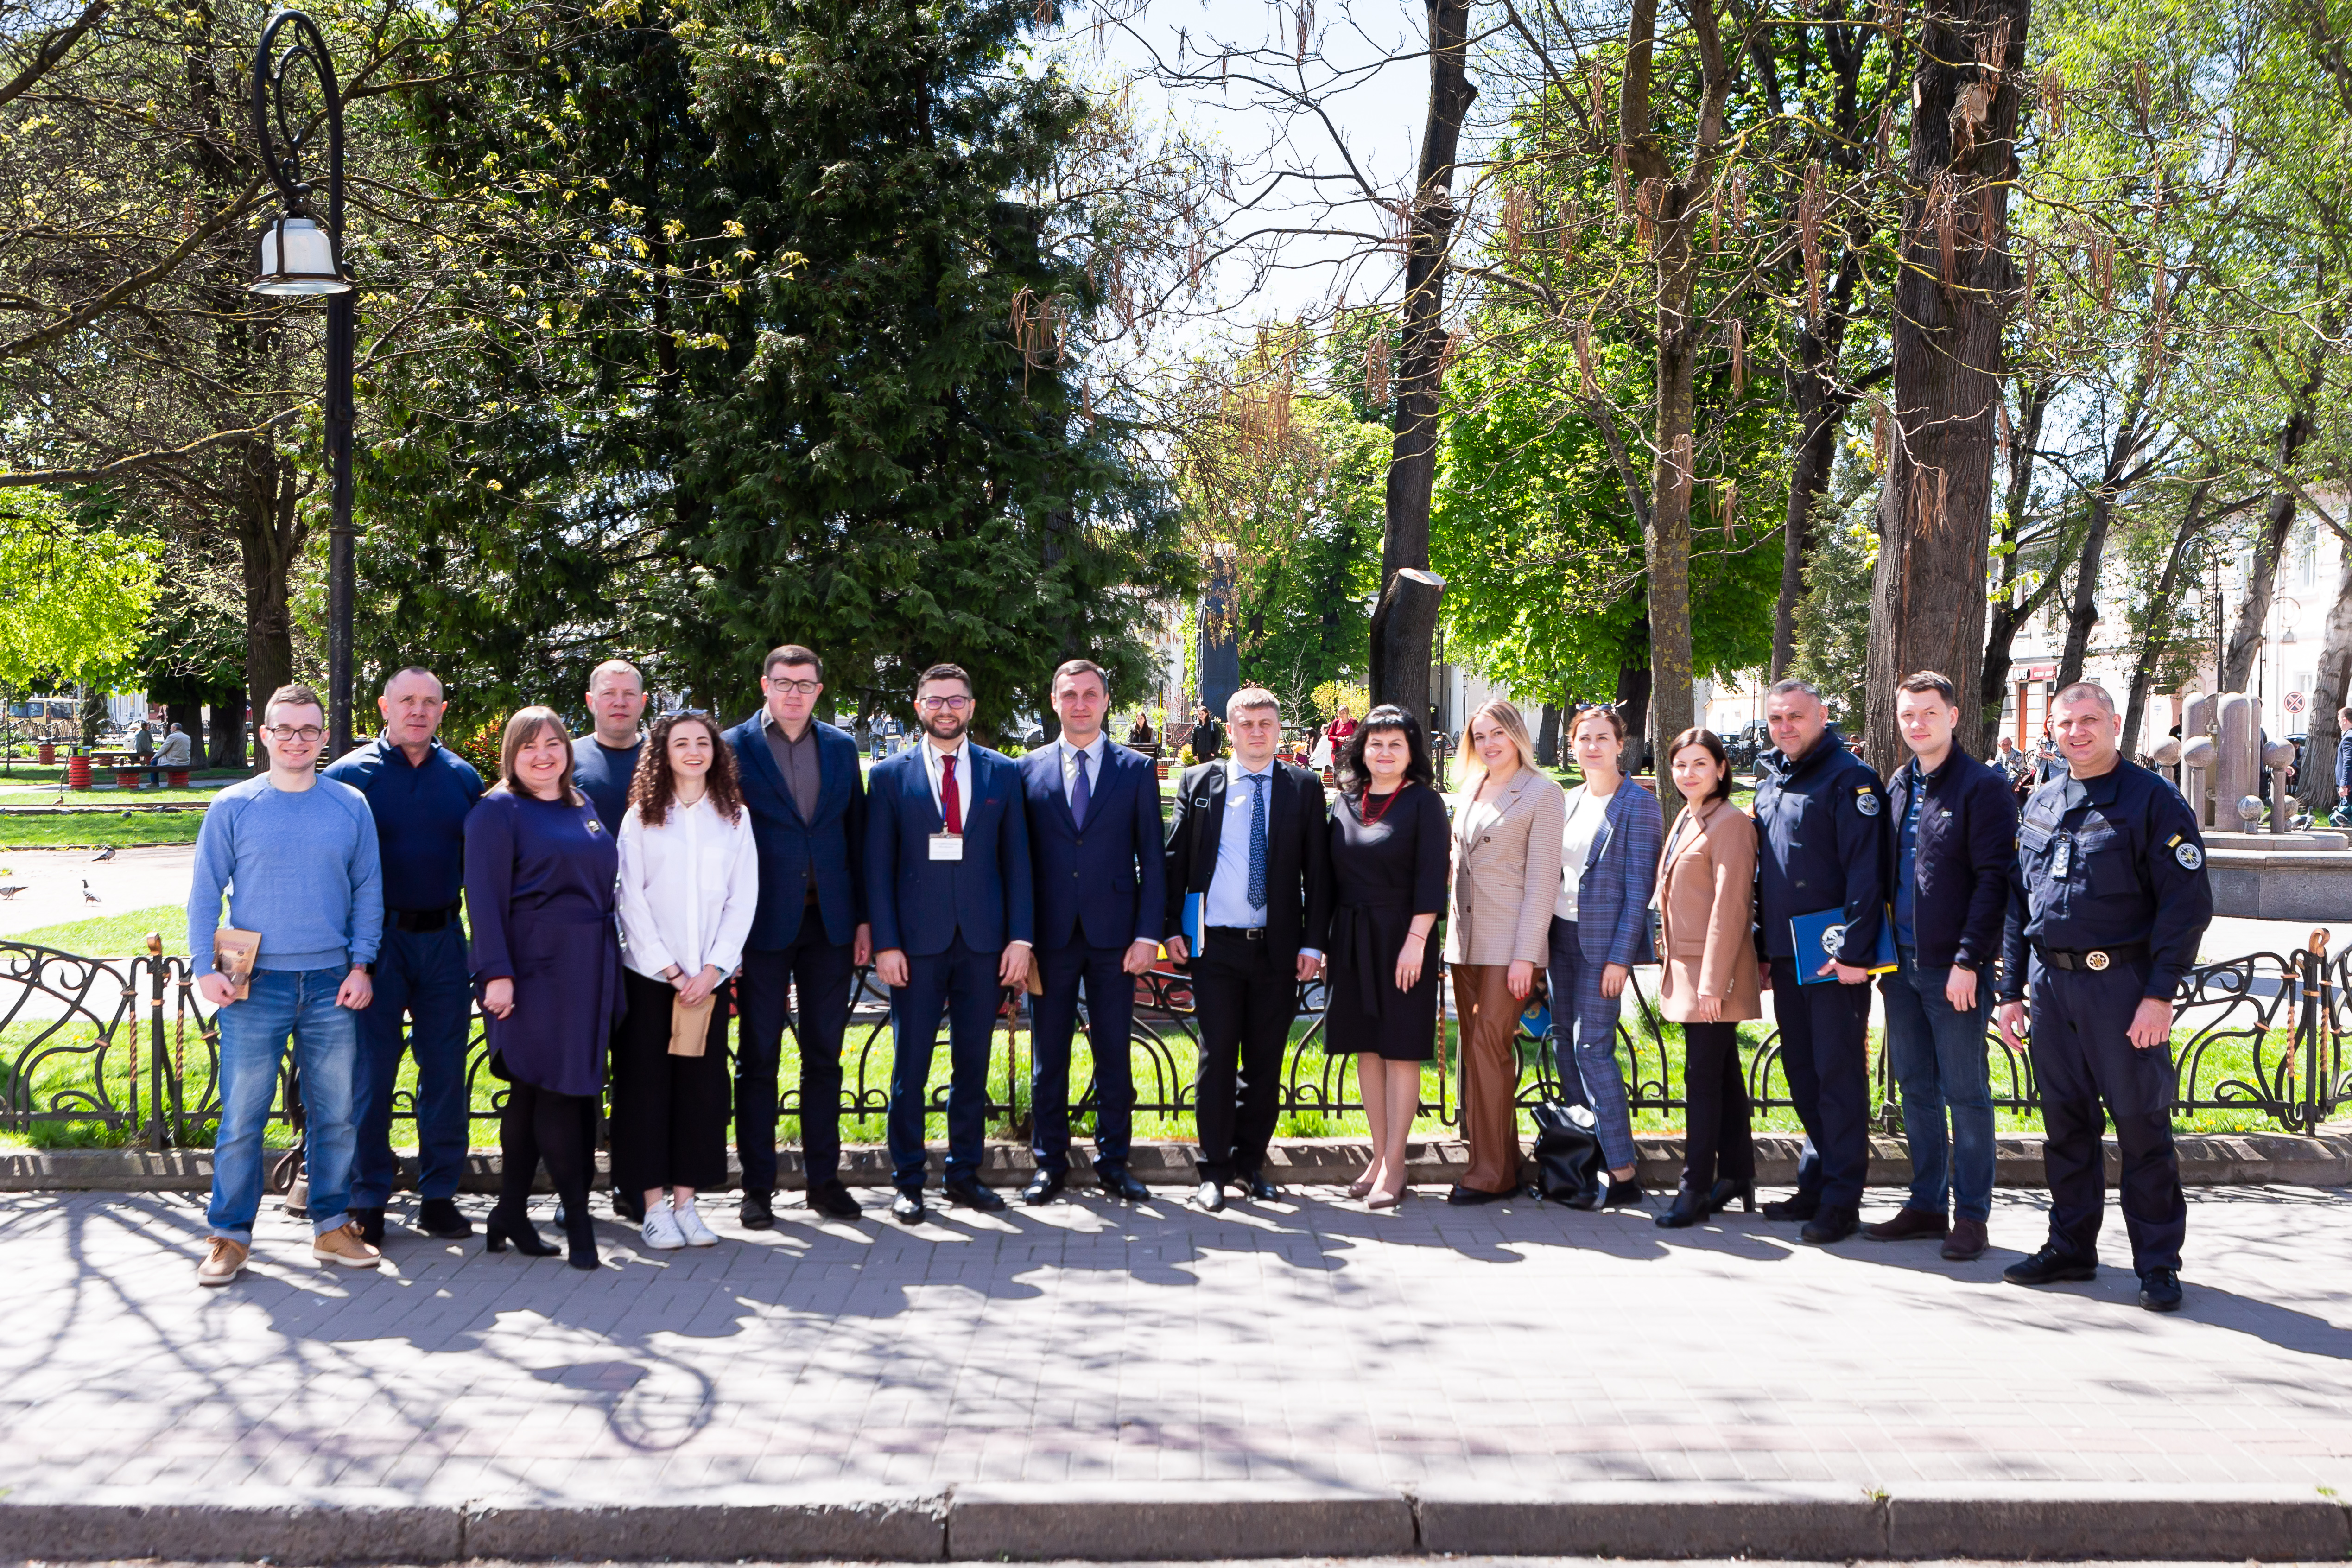 Remapping Local General Courts: EU Project Pravo-Justice Experts and Judiciary Leaders Visit Courts in Lviv Region